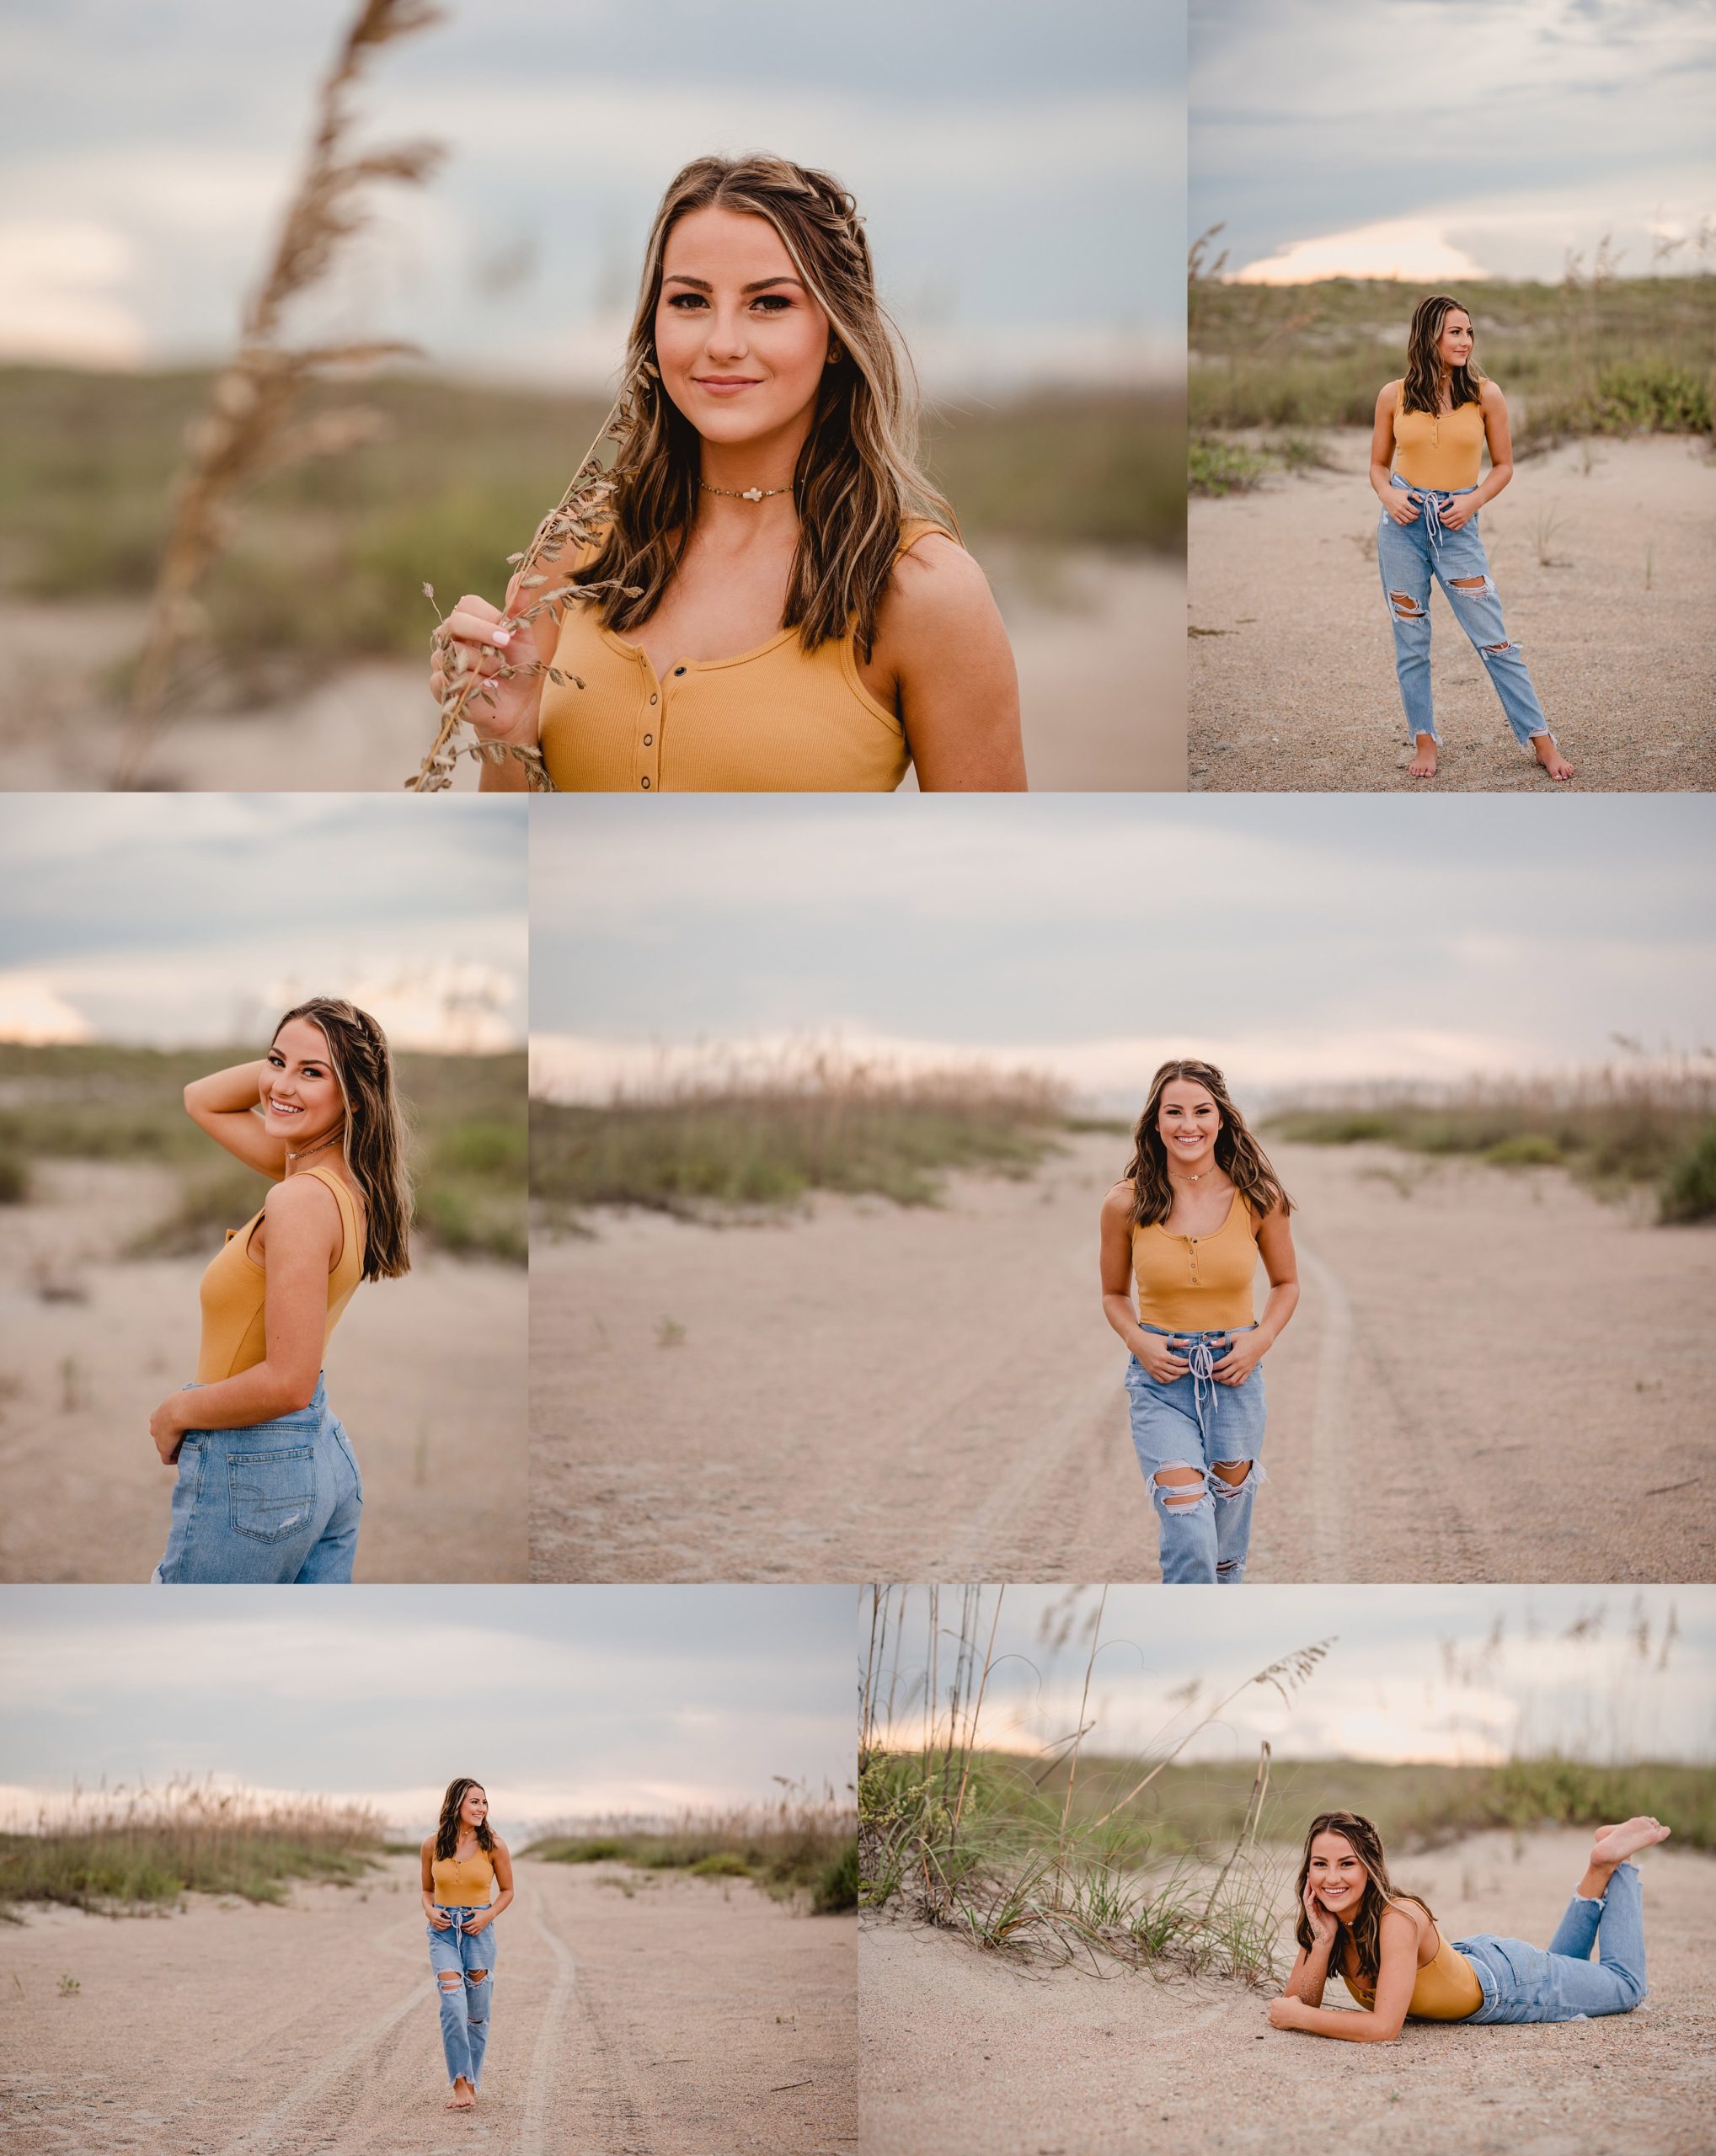 Beachy senior pictures with natural poses